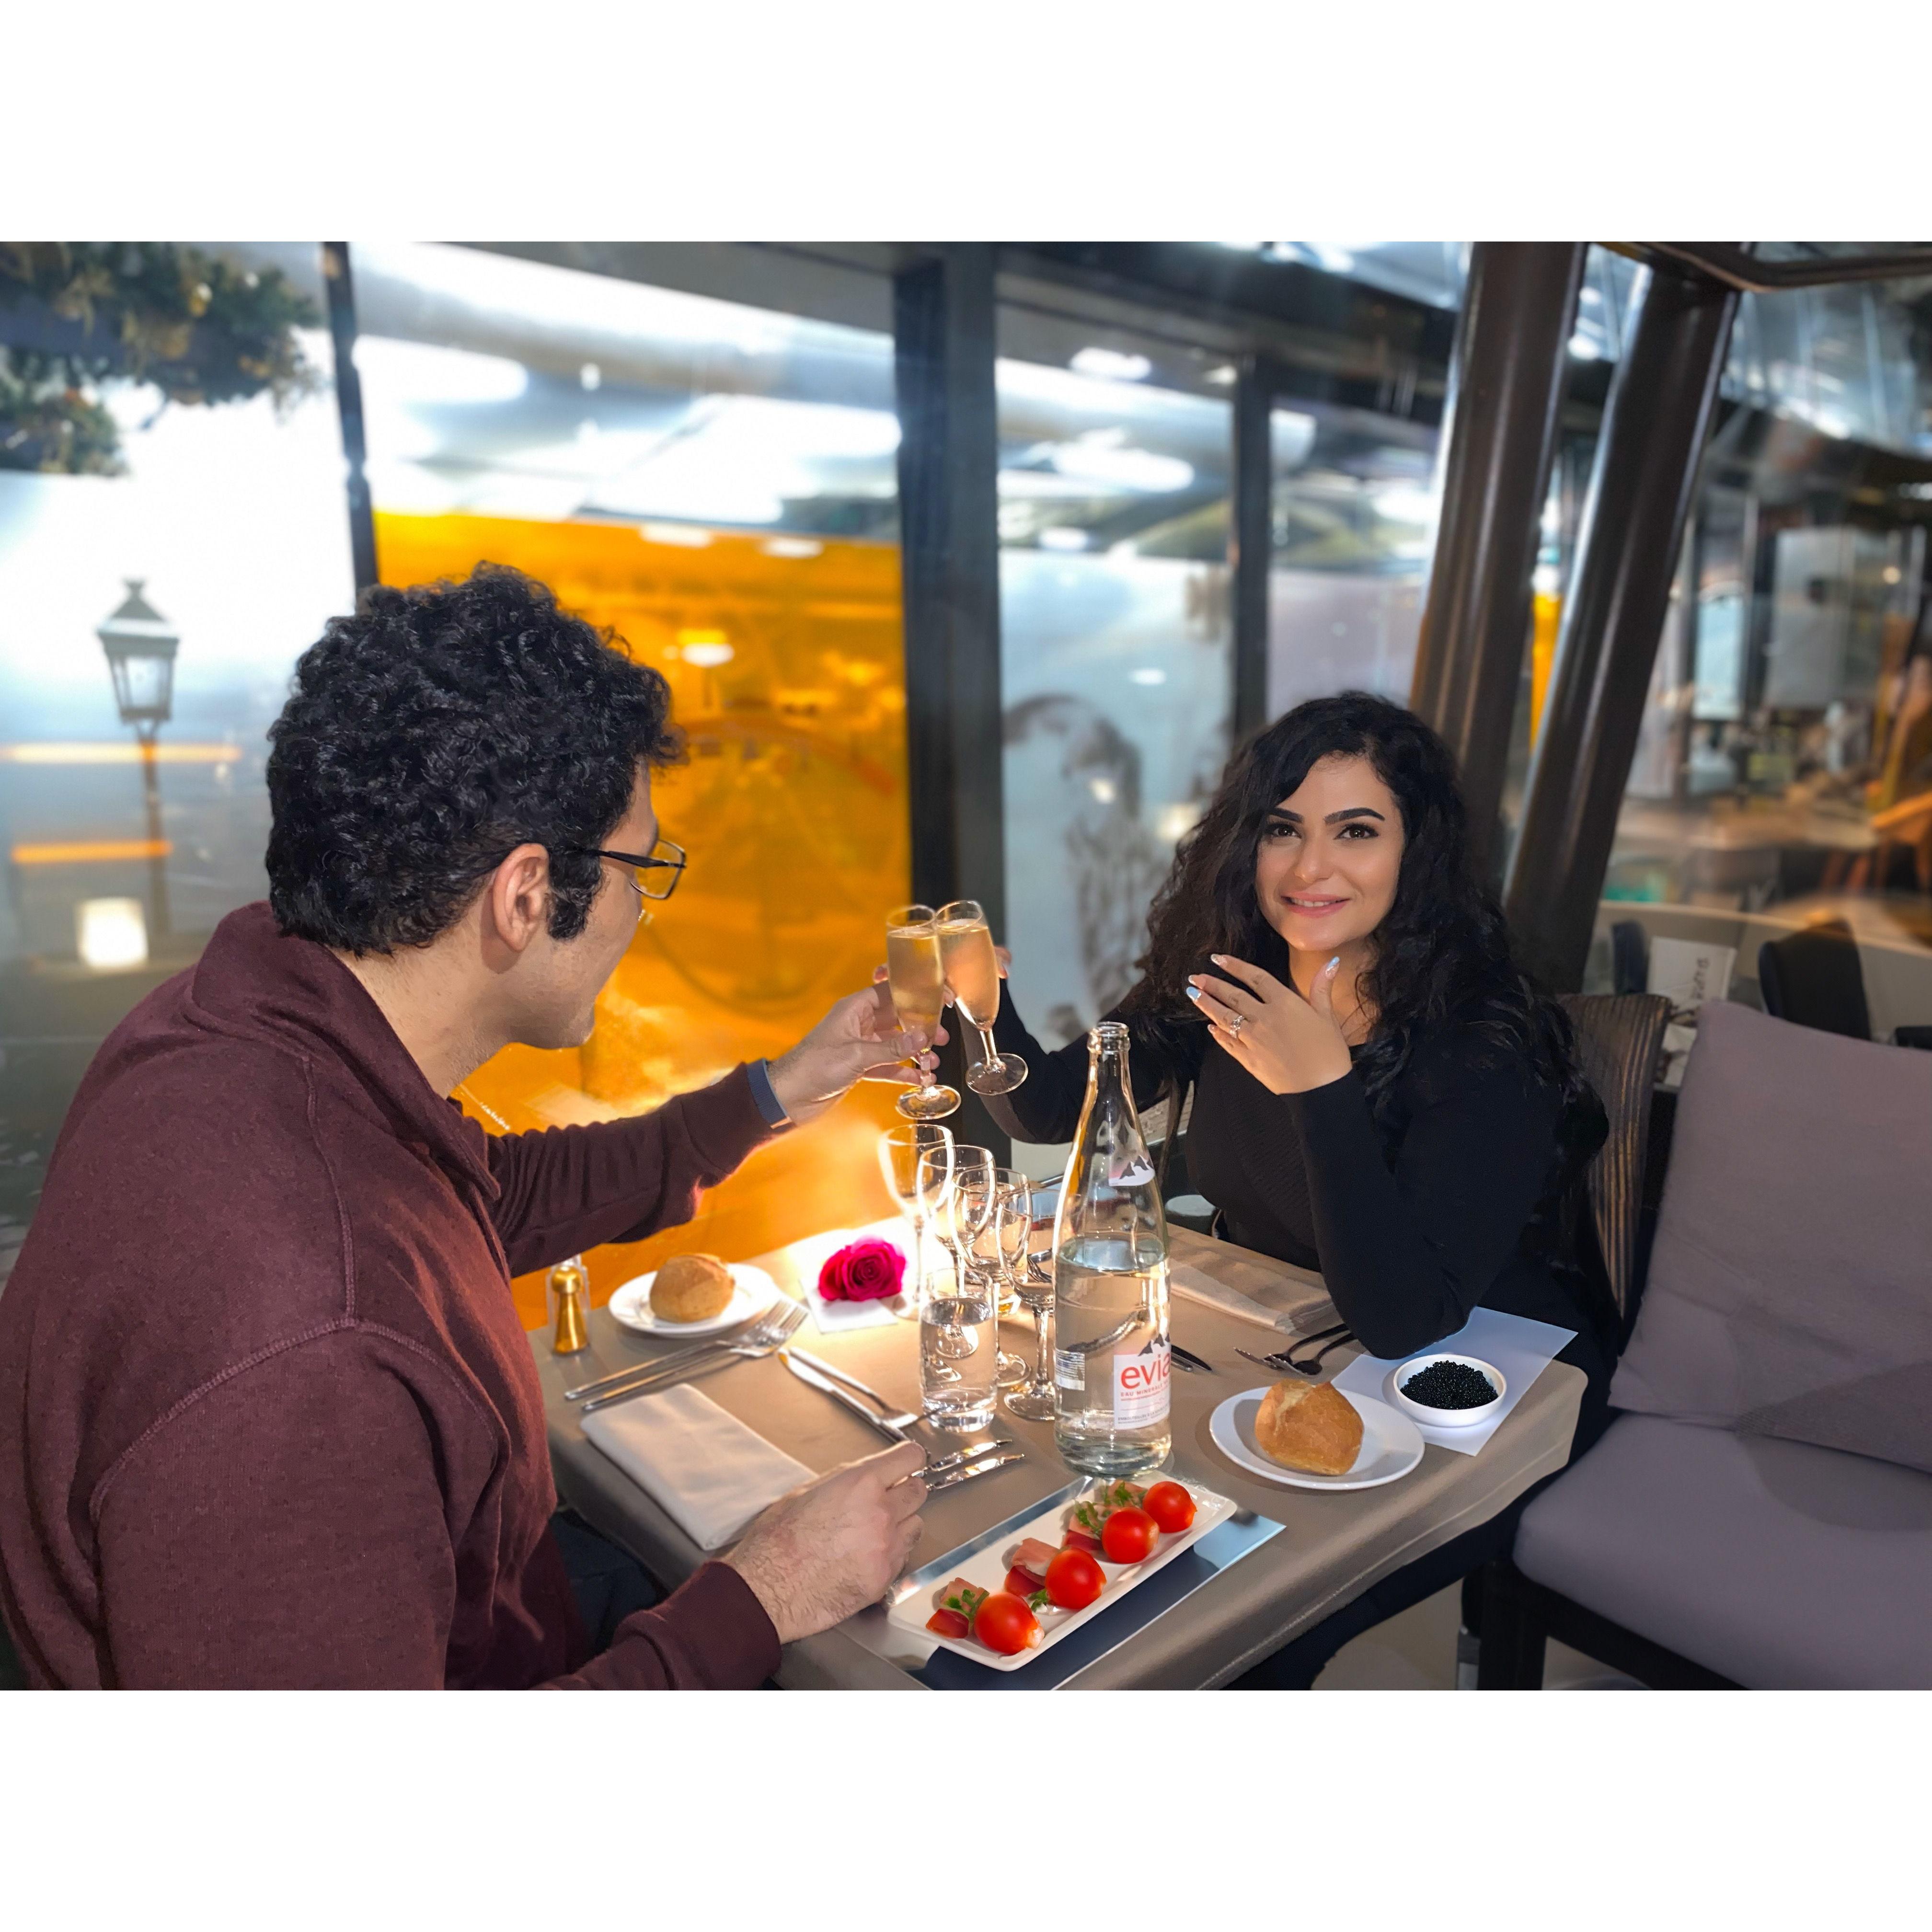 Dinner cruise in Paris as an engaged couple